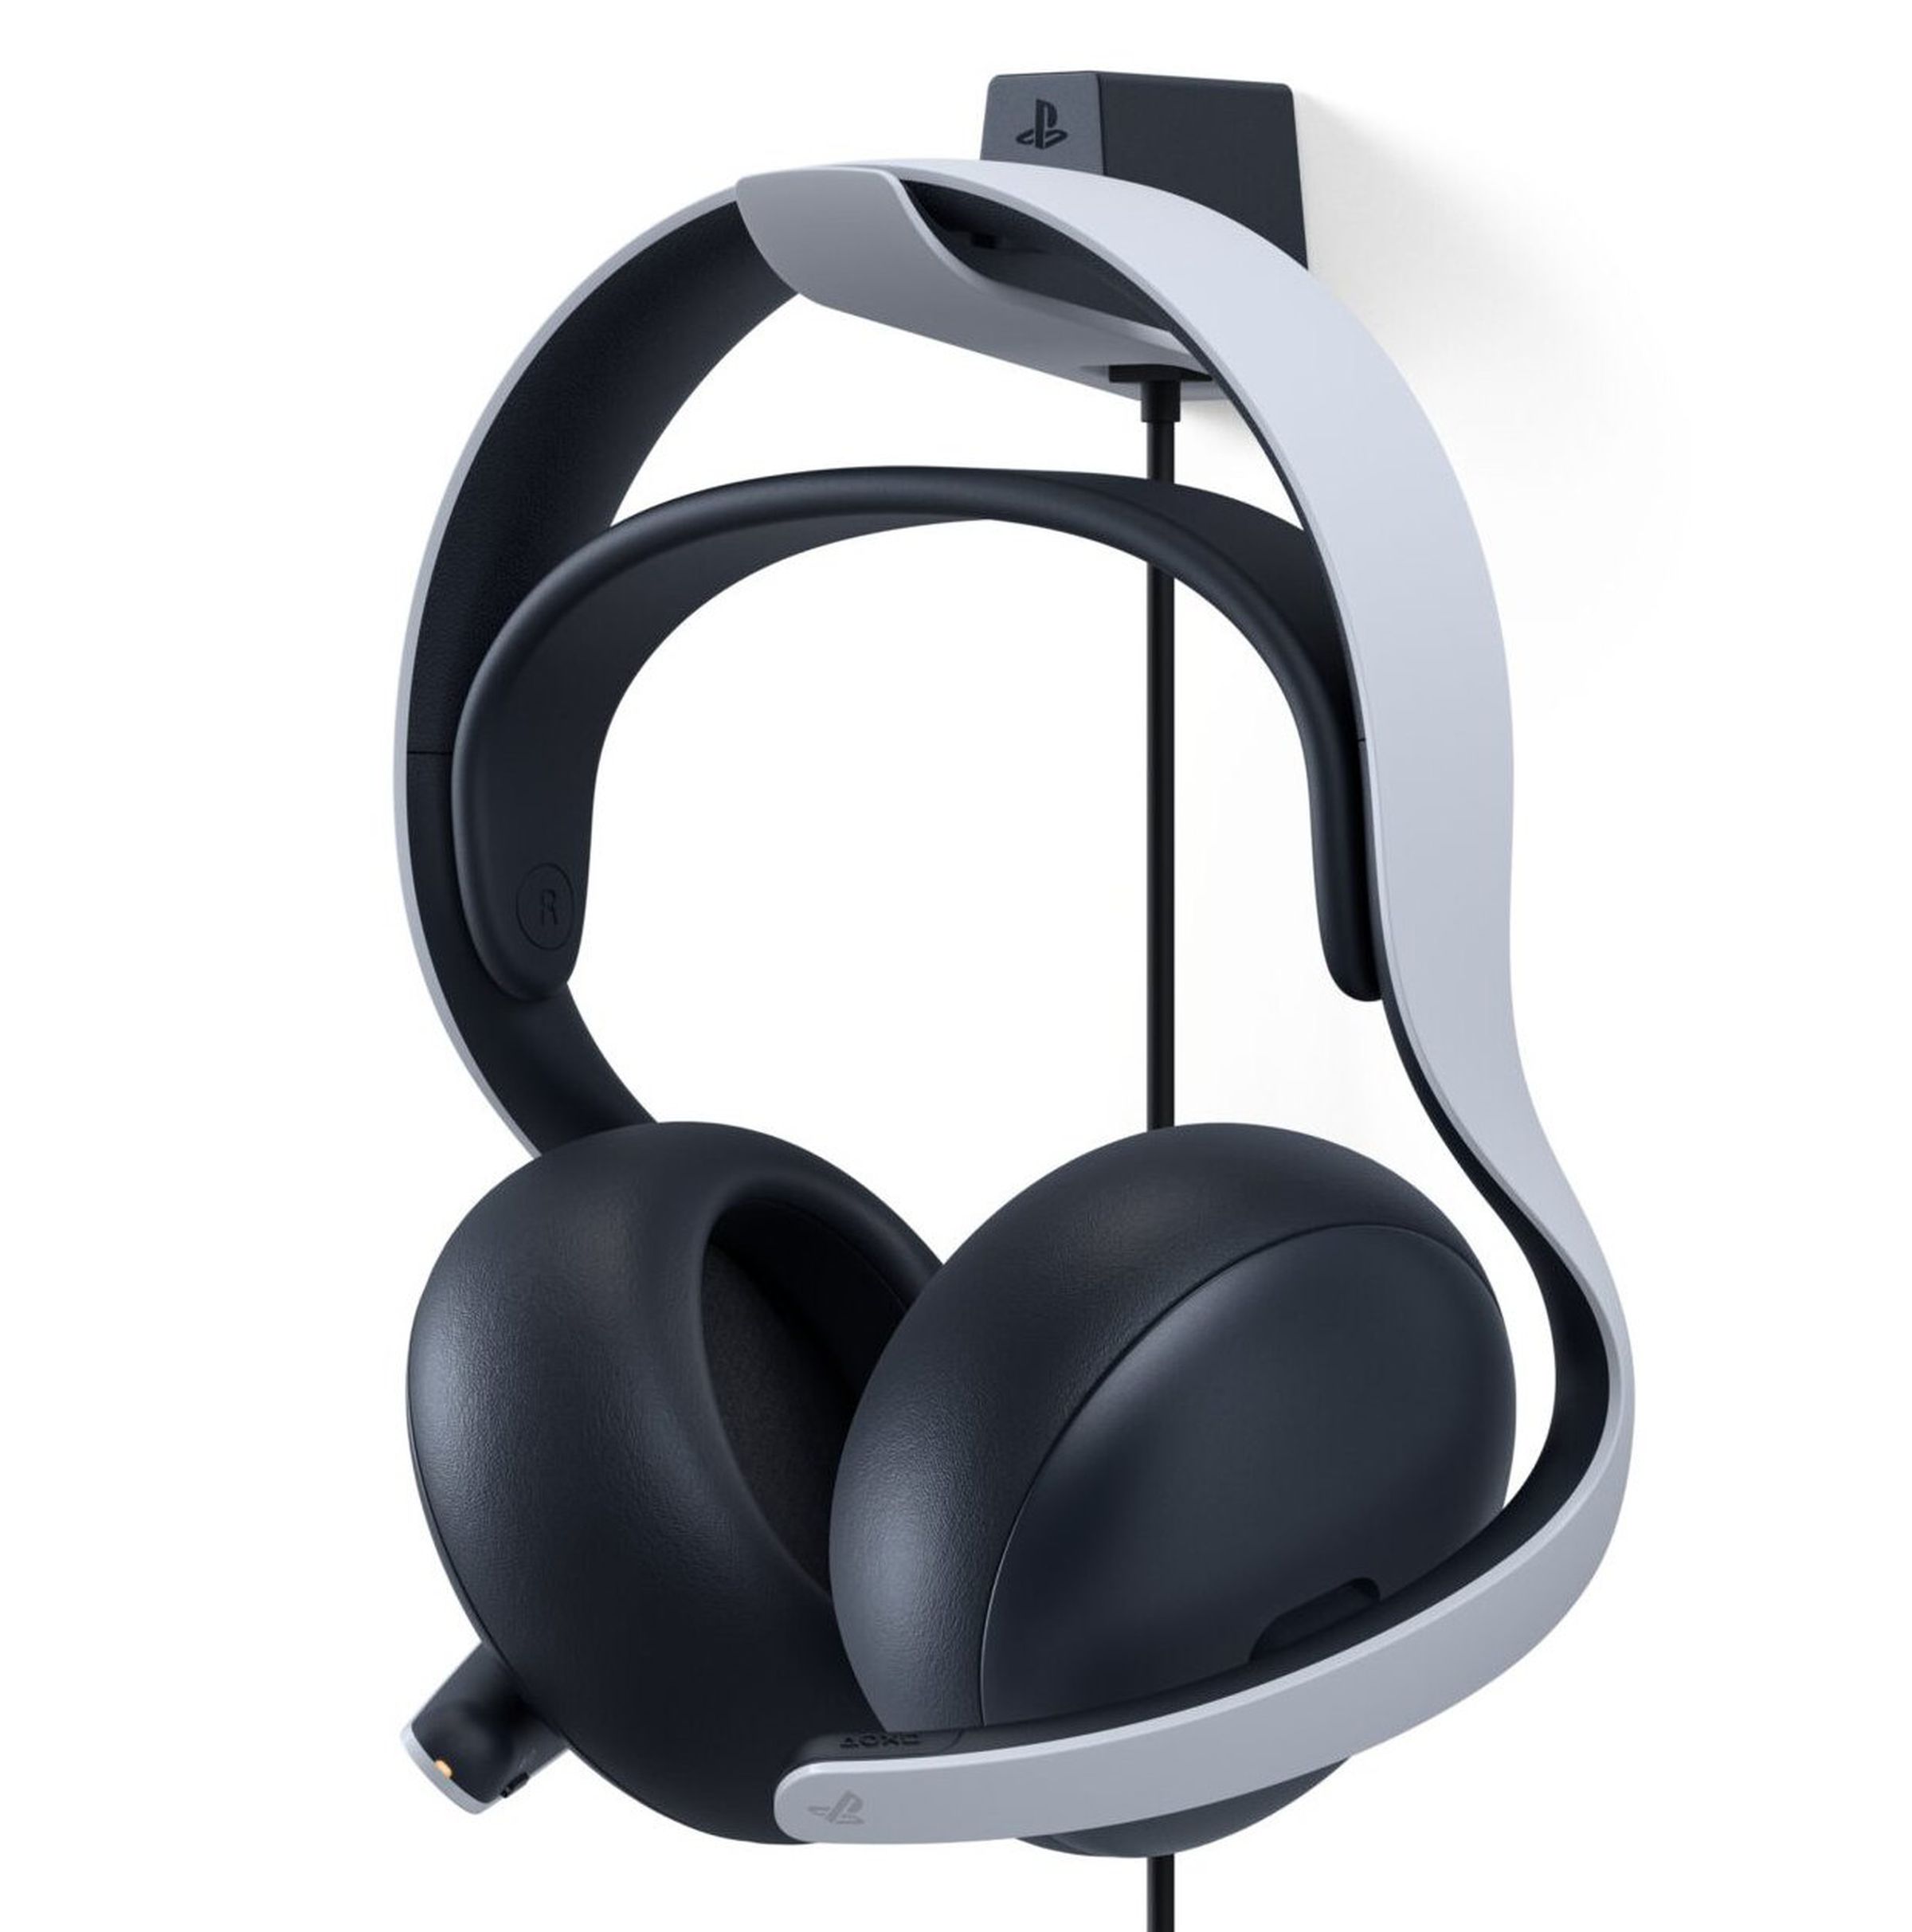 Headphones shown hanging from a mount, white strap and black ear cups.